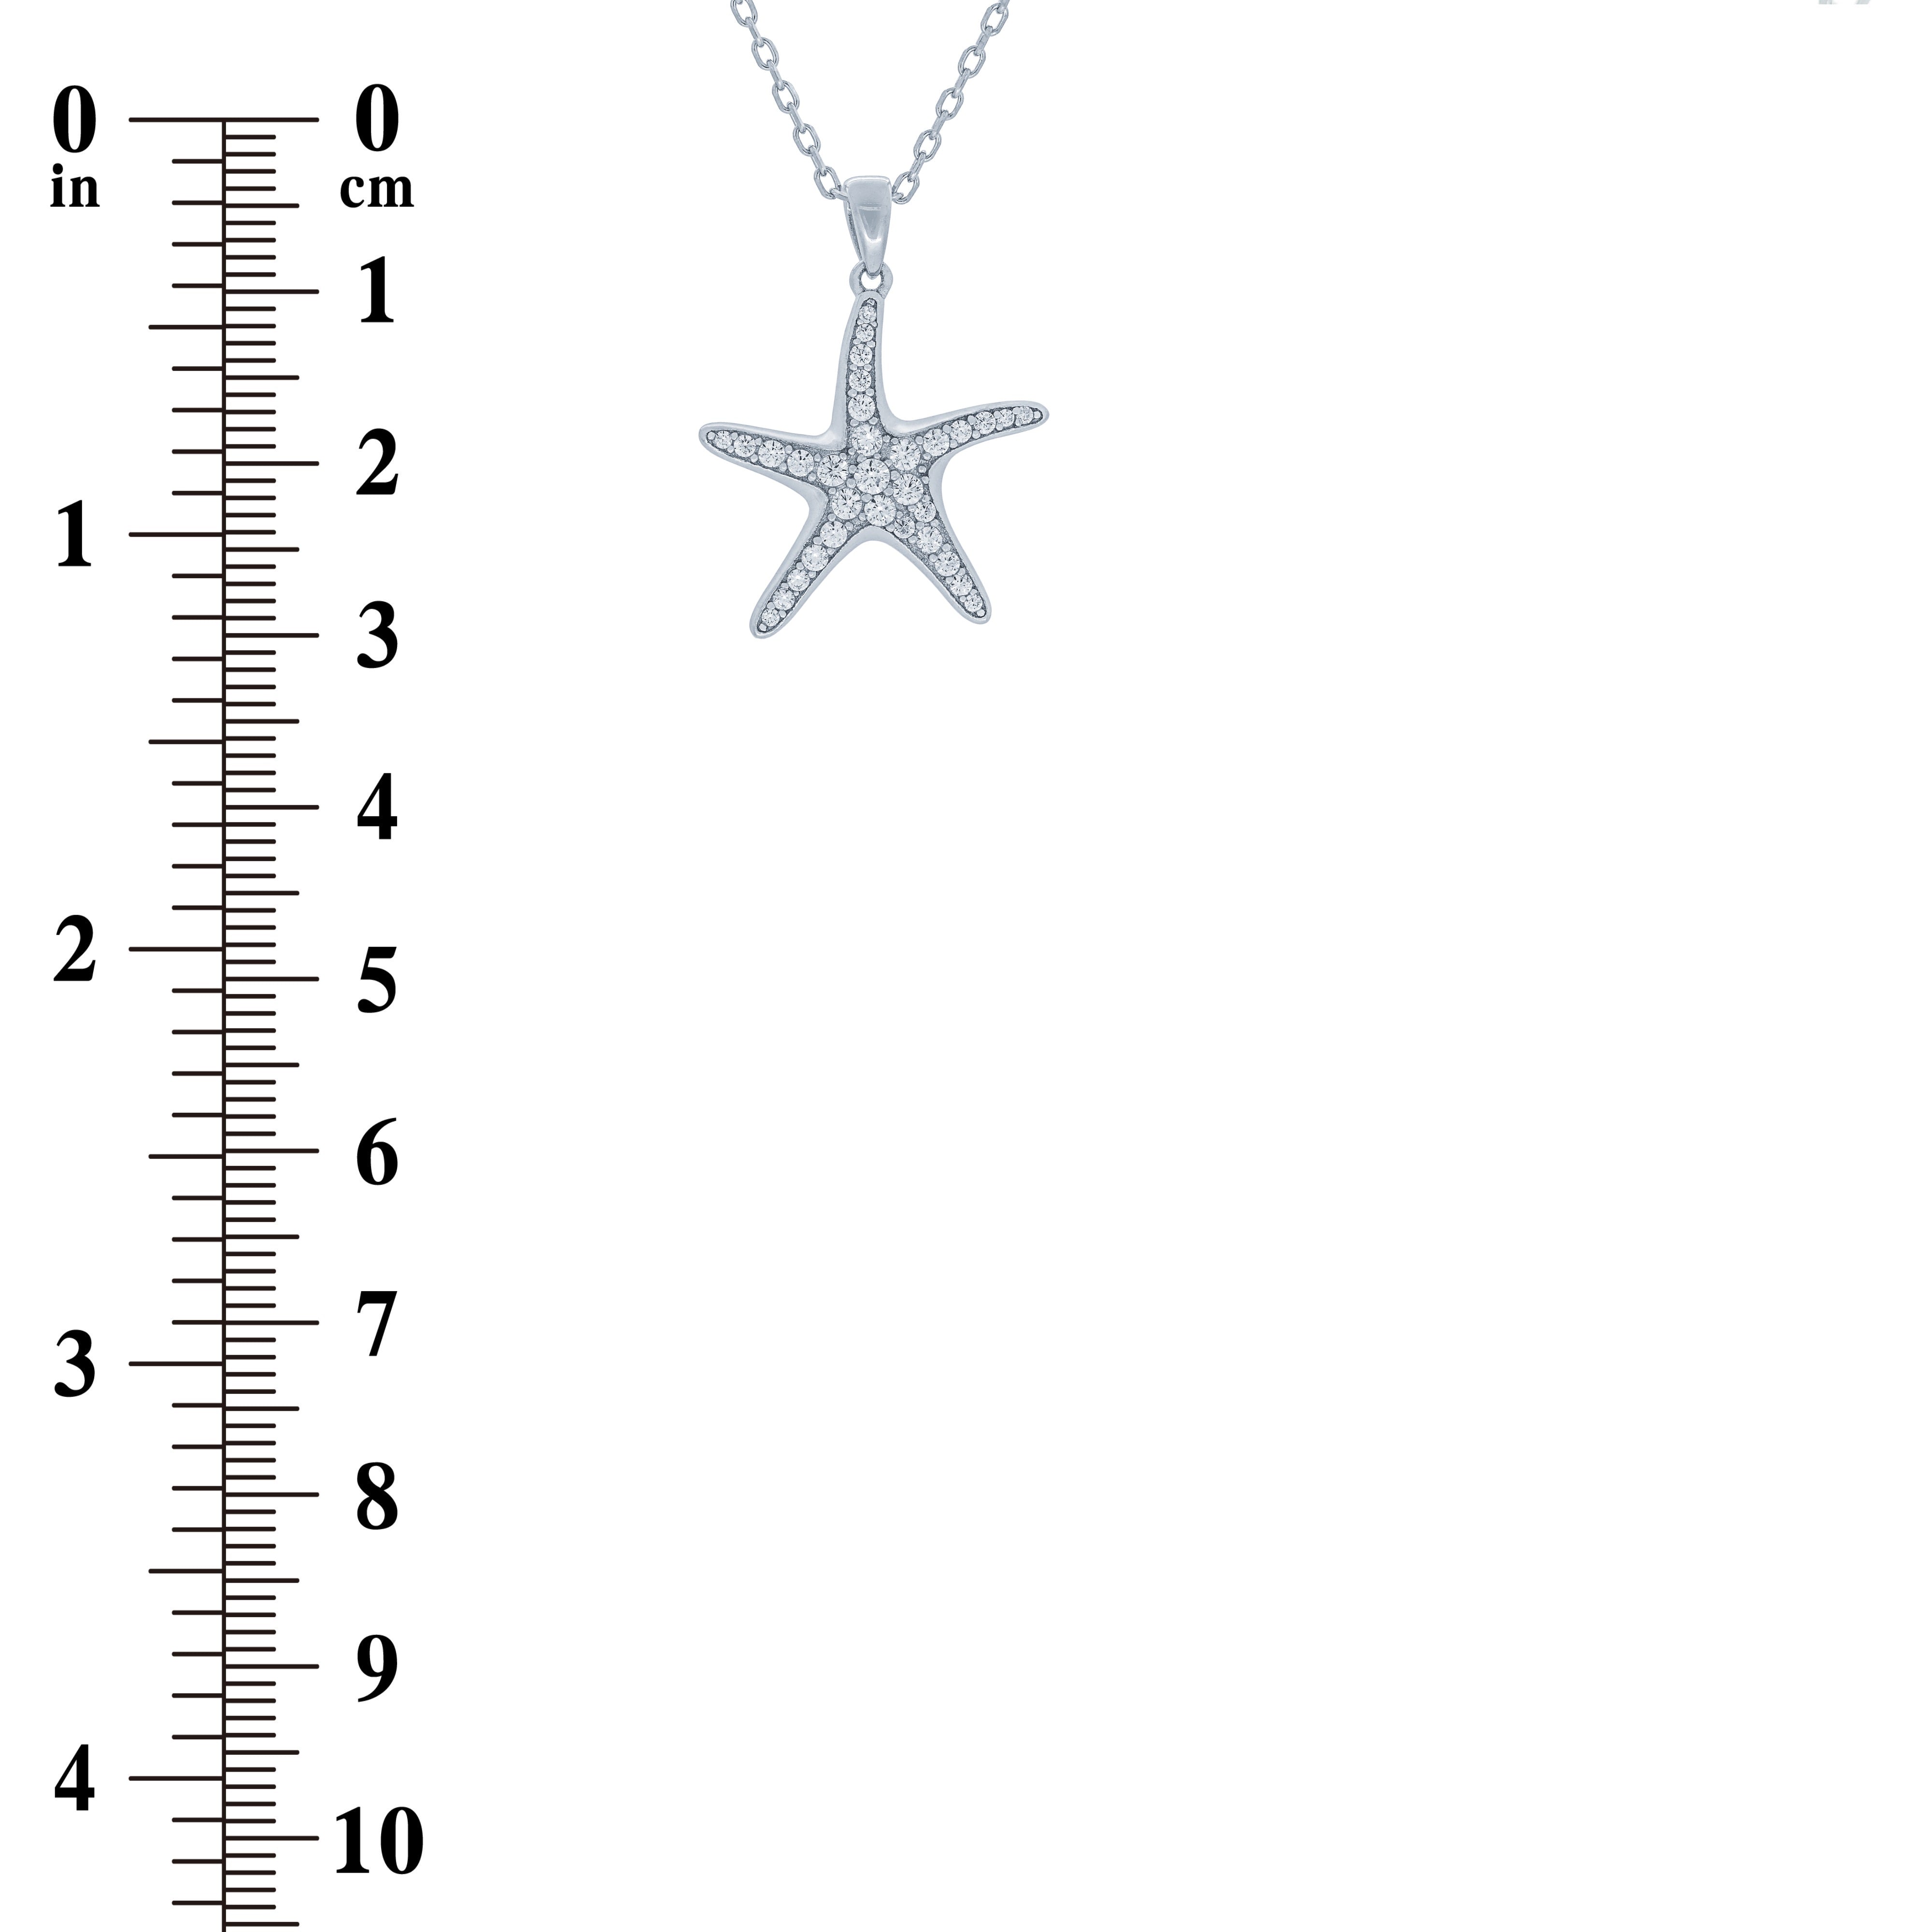 (100157) White Cubic Zirconia Sea Star Pendant Necklace In Sterling Silver